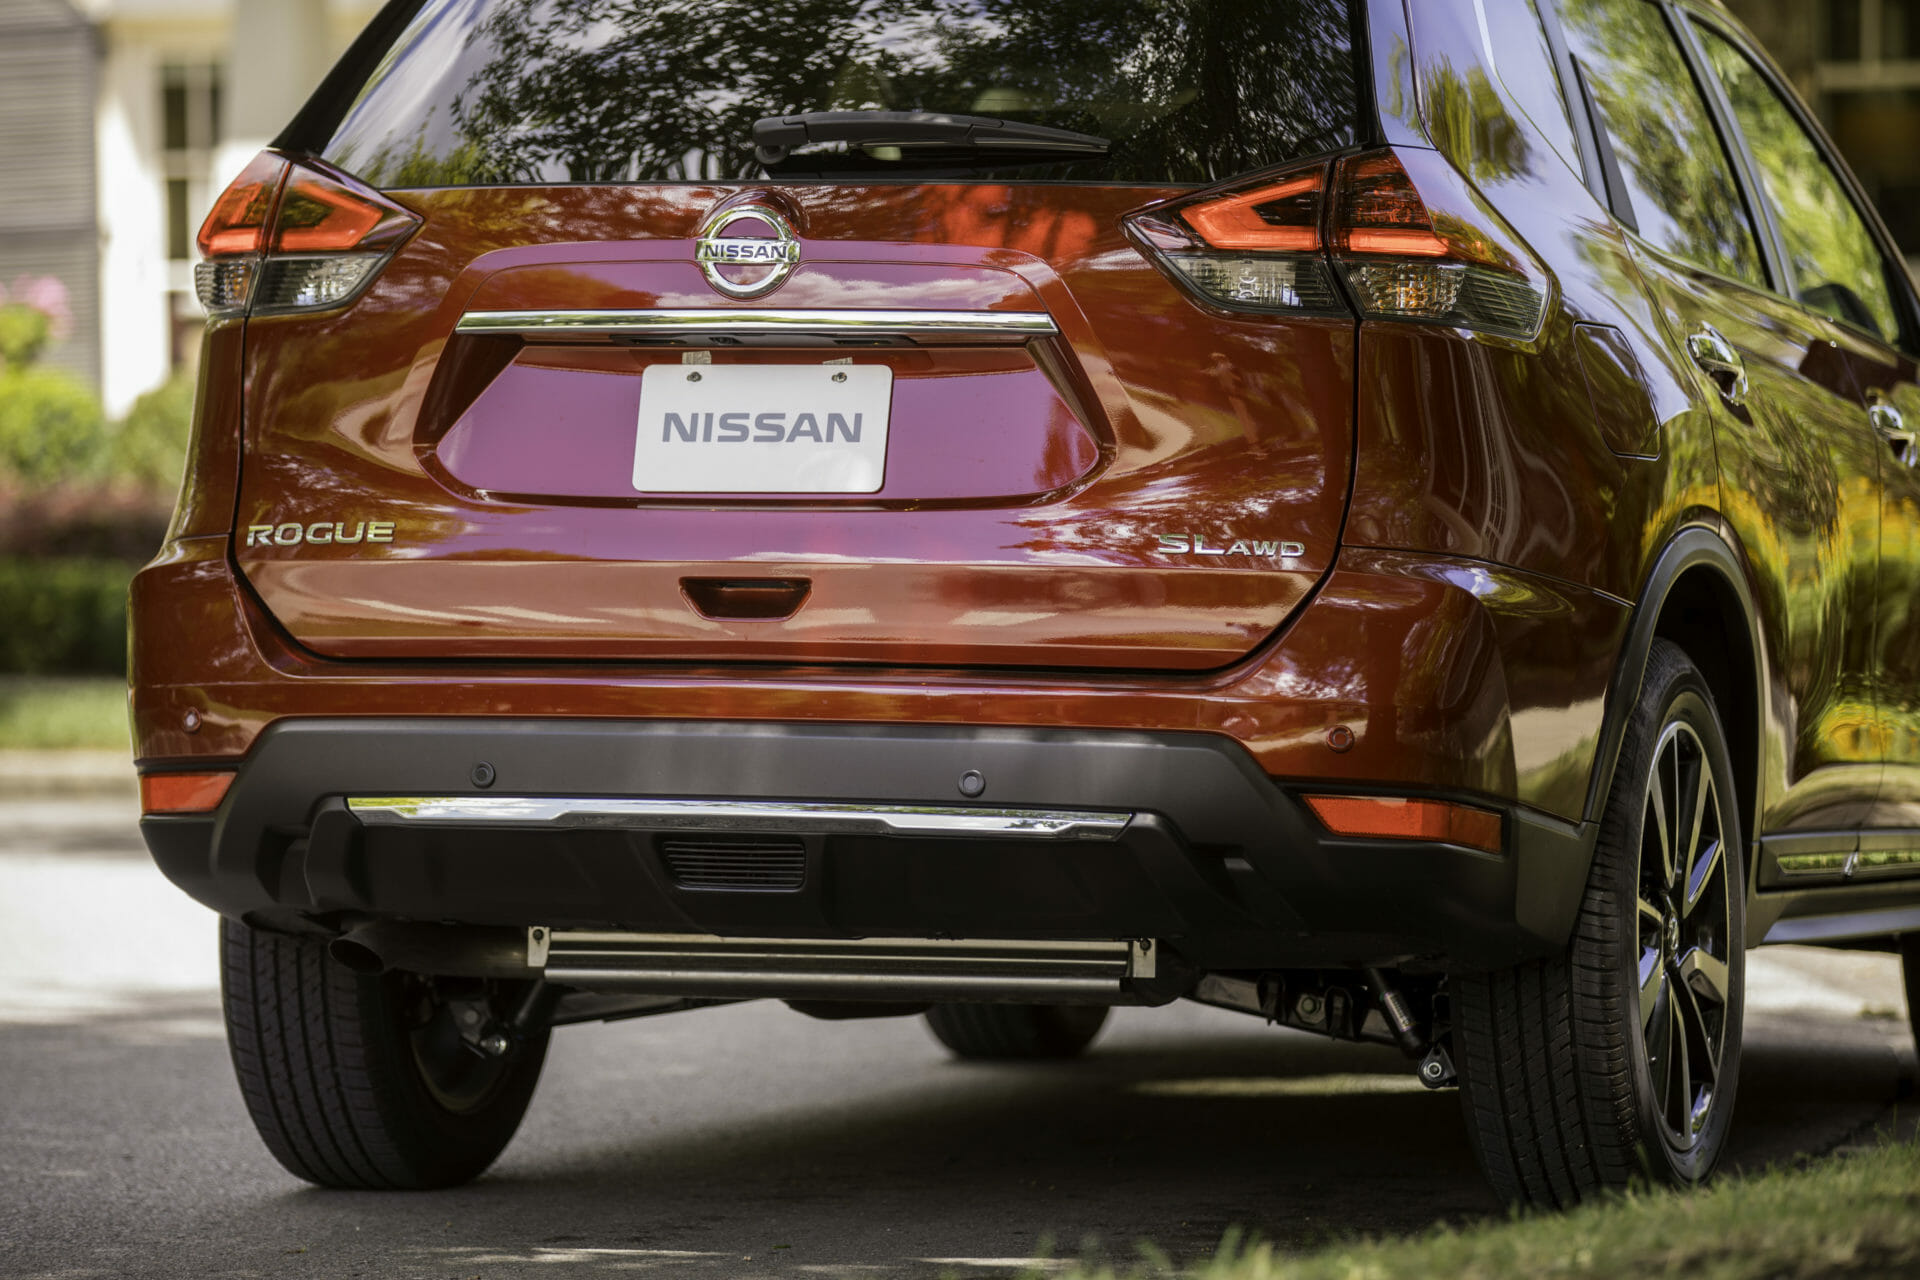 2019 Nissan Rogue SL - Photos by Nissan